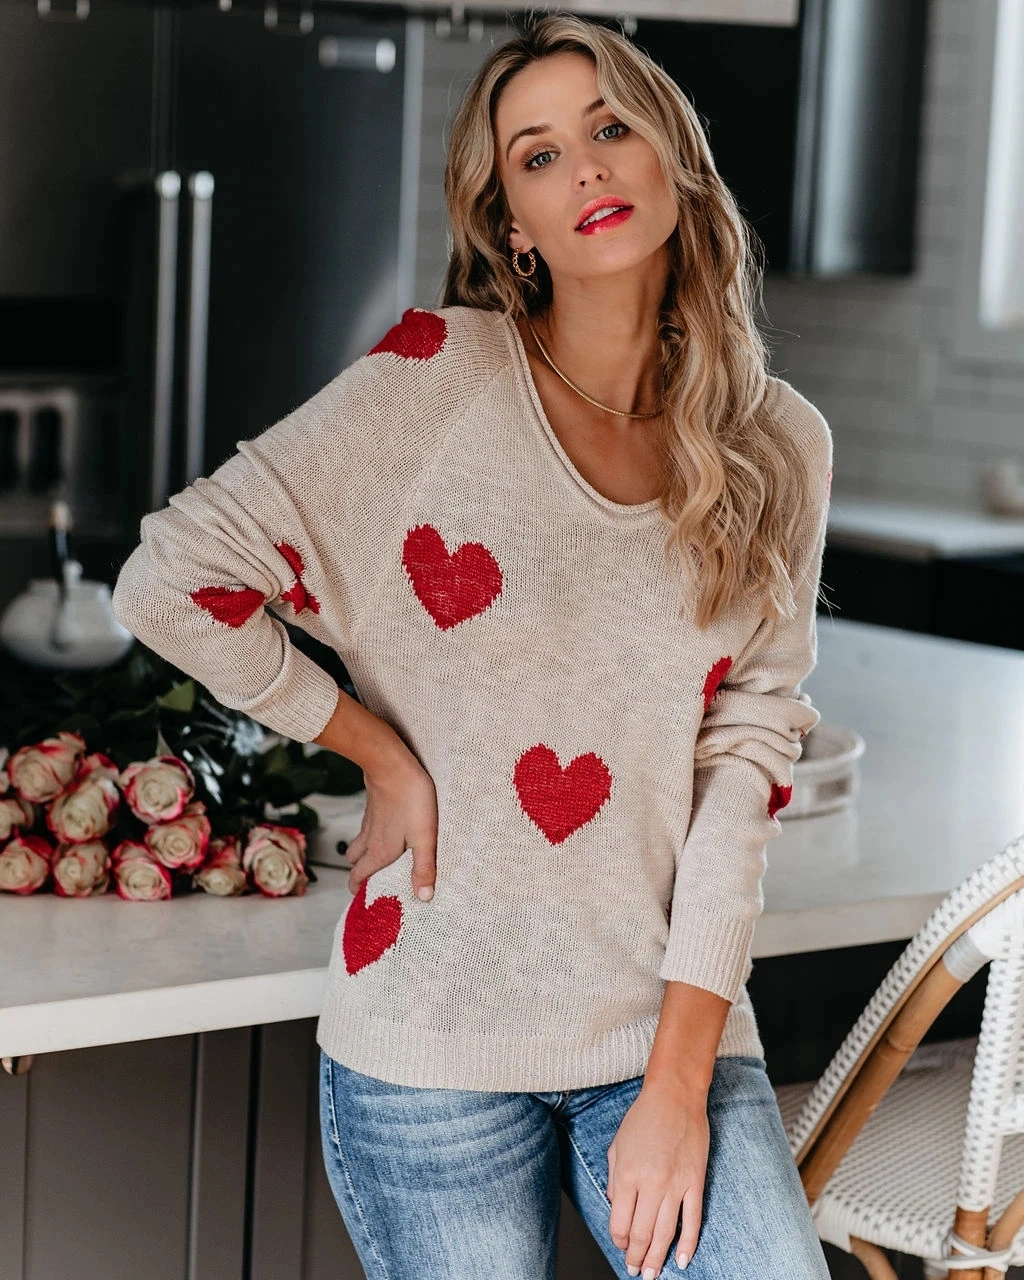 Love V-Neck Knitted Women Casual Fashion Sweater Winter Clothes